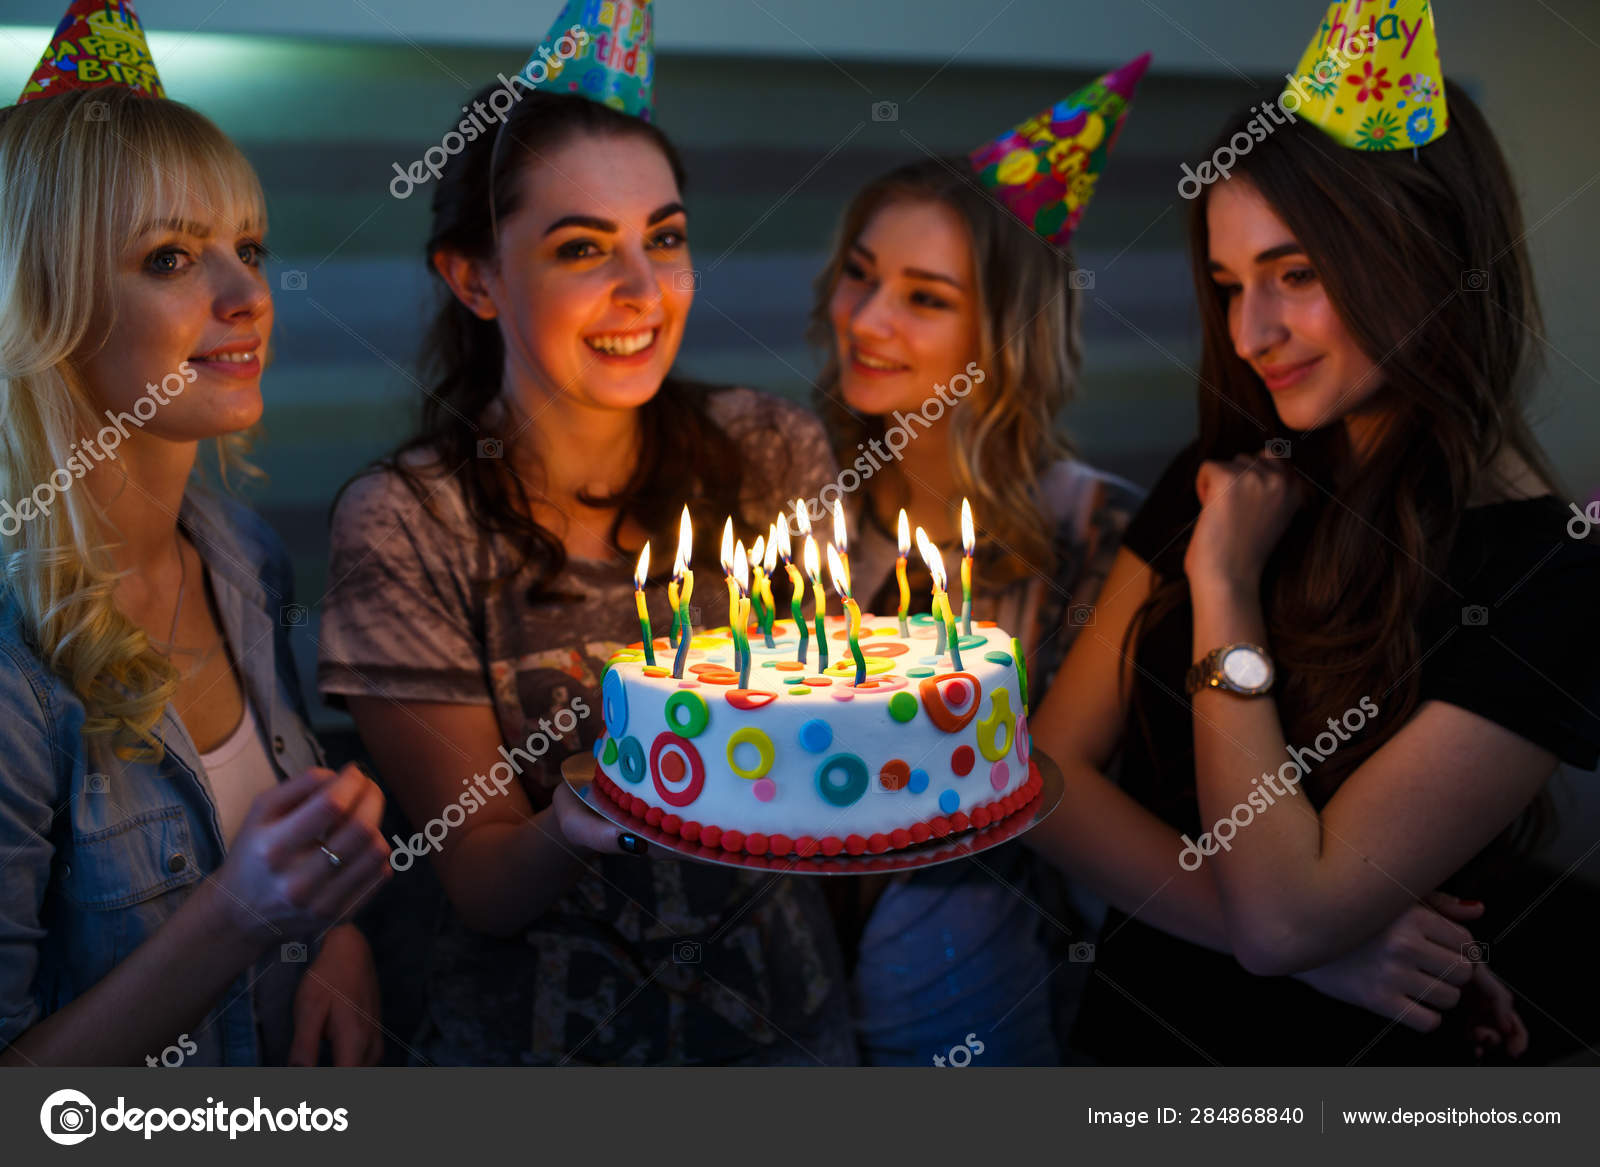 Happy Birthday Wishes - Birthday girl poses. Find out more birthday  photoshoot ideas here at https://2happybirthday.com/birthday-photoshoot-ideas/  #birthdayphotoshoot | Facebook